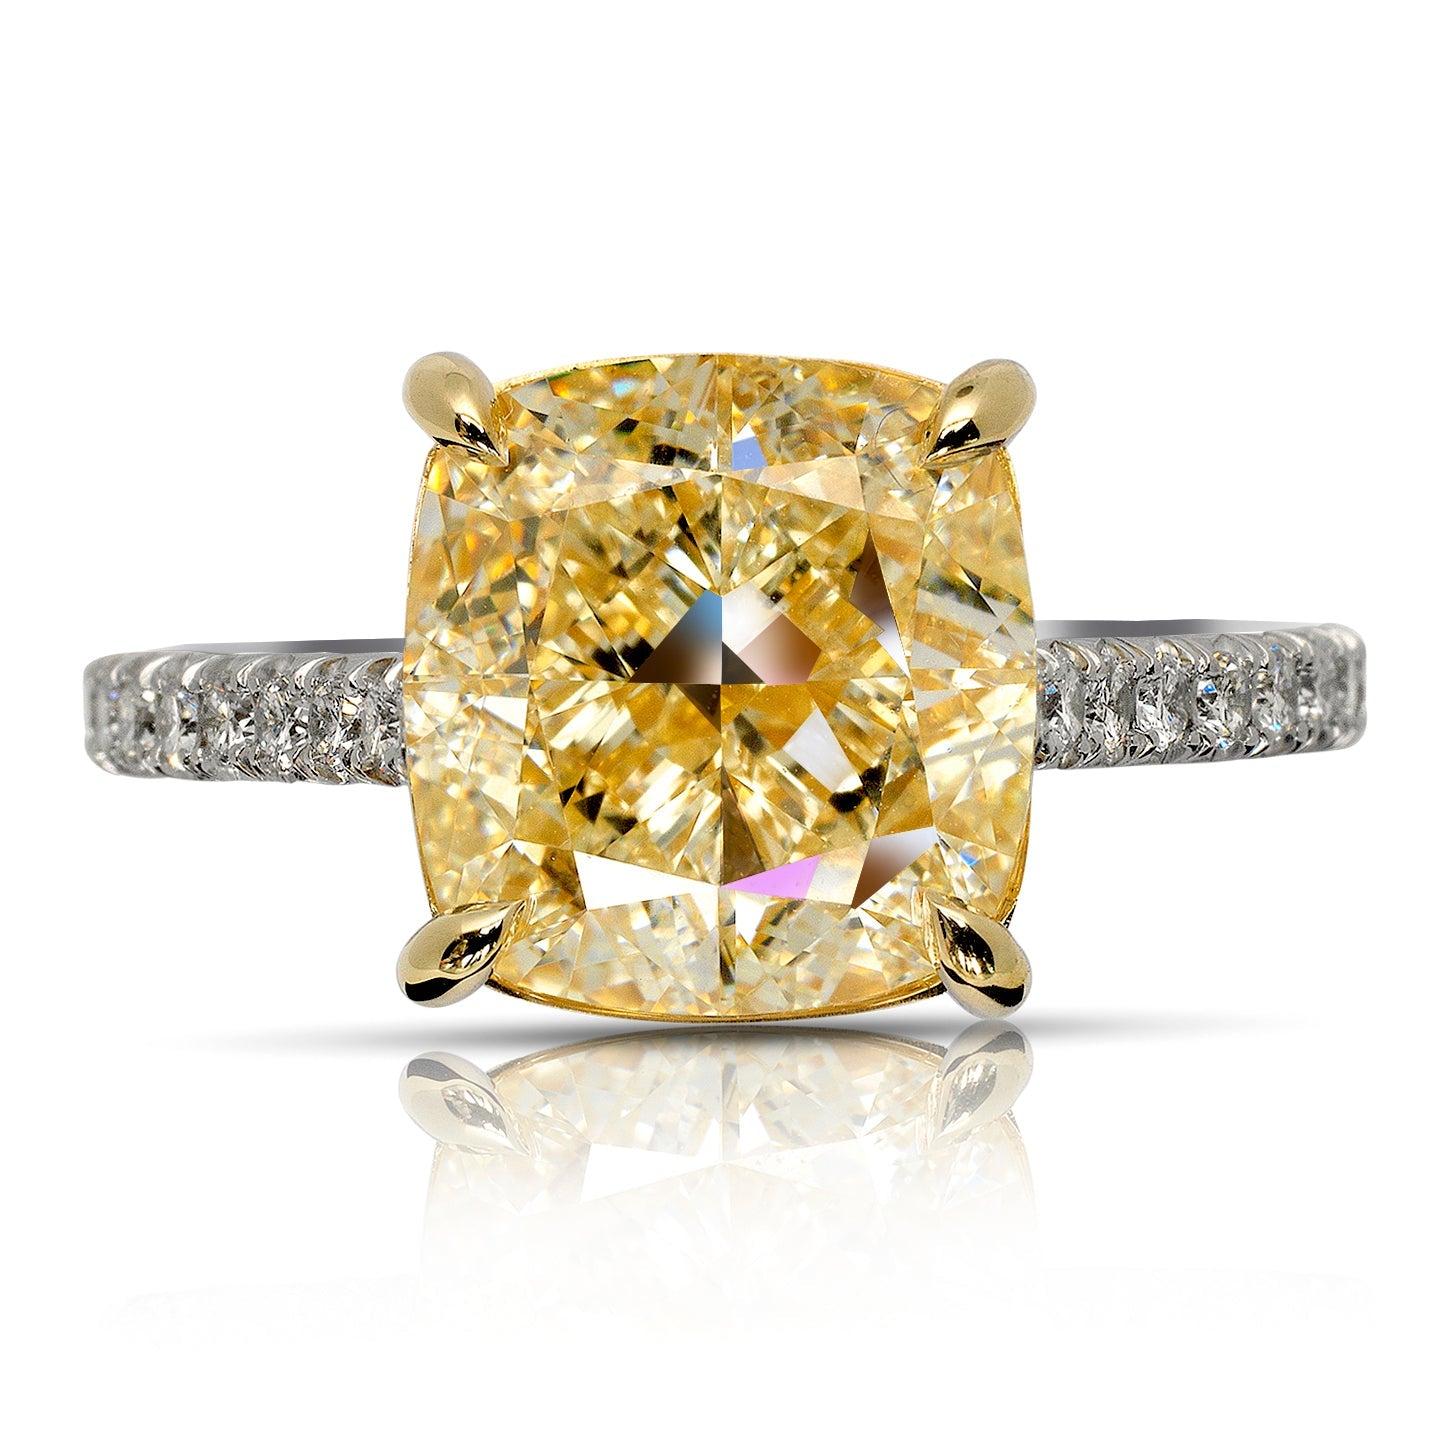 MEG CUSHION CUT YELLOW DIAMOND ENGAGEMENT RING BY MIKE NEKTA
Center Diamond:

GIA CERTIFIED
Carat Weight: 5 Carats
Color:  W TO X RANGE 
Clarity: VS1
Style:  CUSHION MODIFIED BRILLIANT
Approximate Measurements:  9.3 x 8.9 x 6.4 mm 
 
Ring:
Metal: